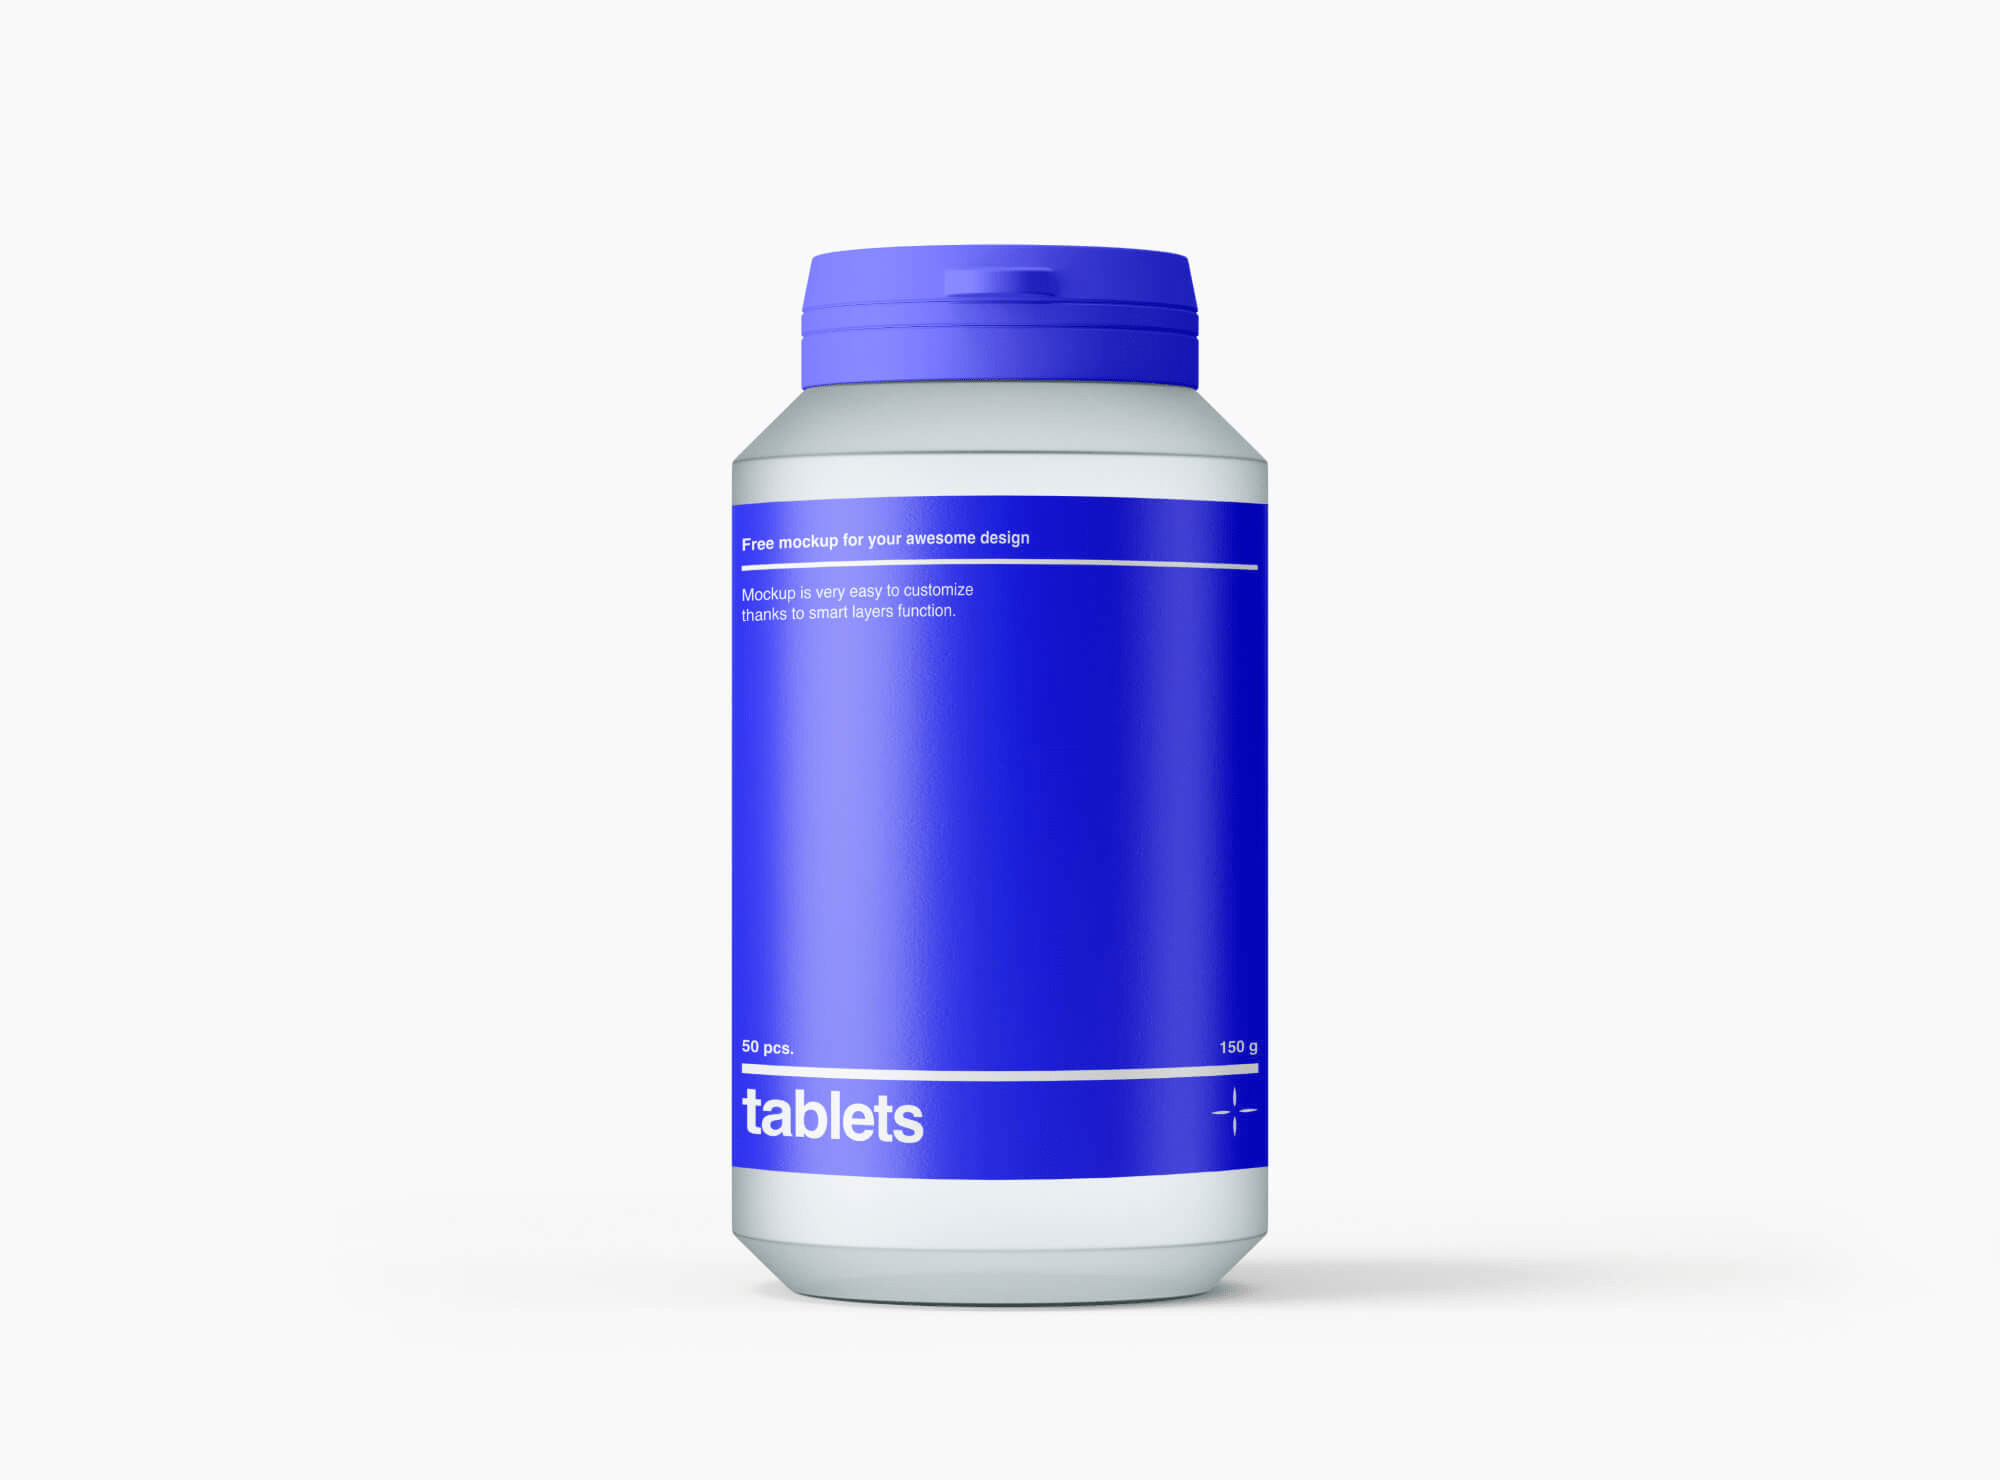 Free Pill Jar Mockup in Blue with Smart Layers for Easy Customization - Downloadable Design Tool